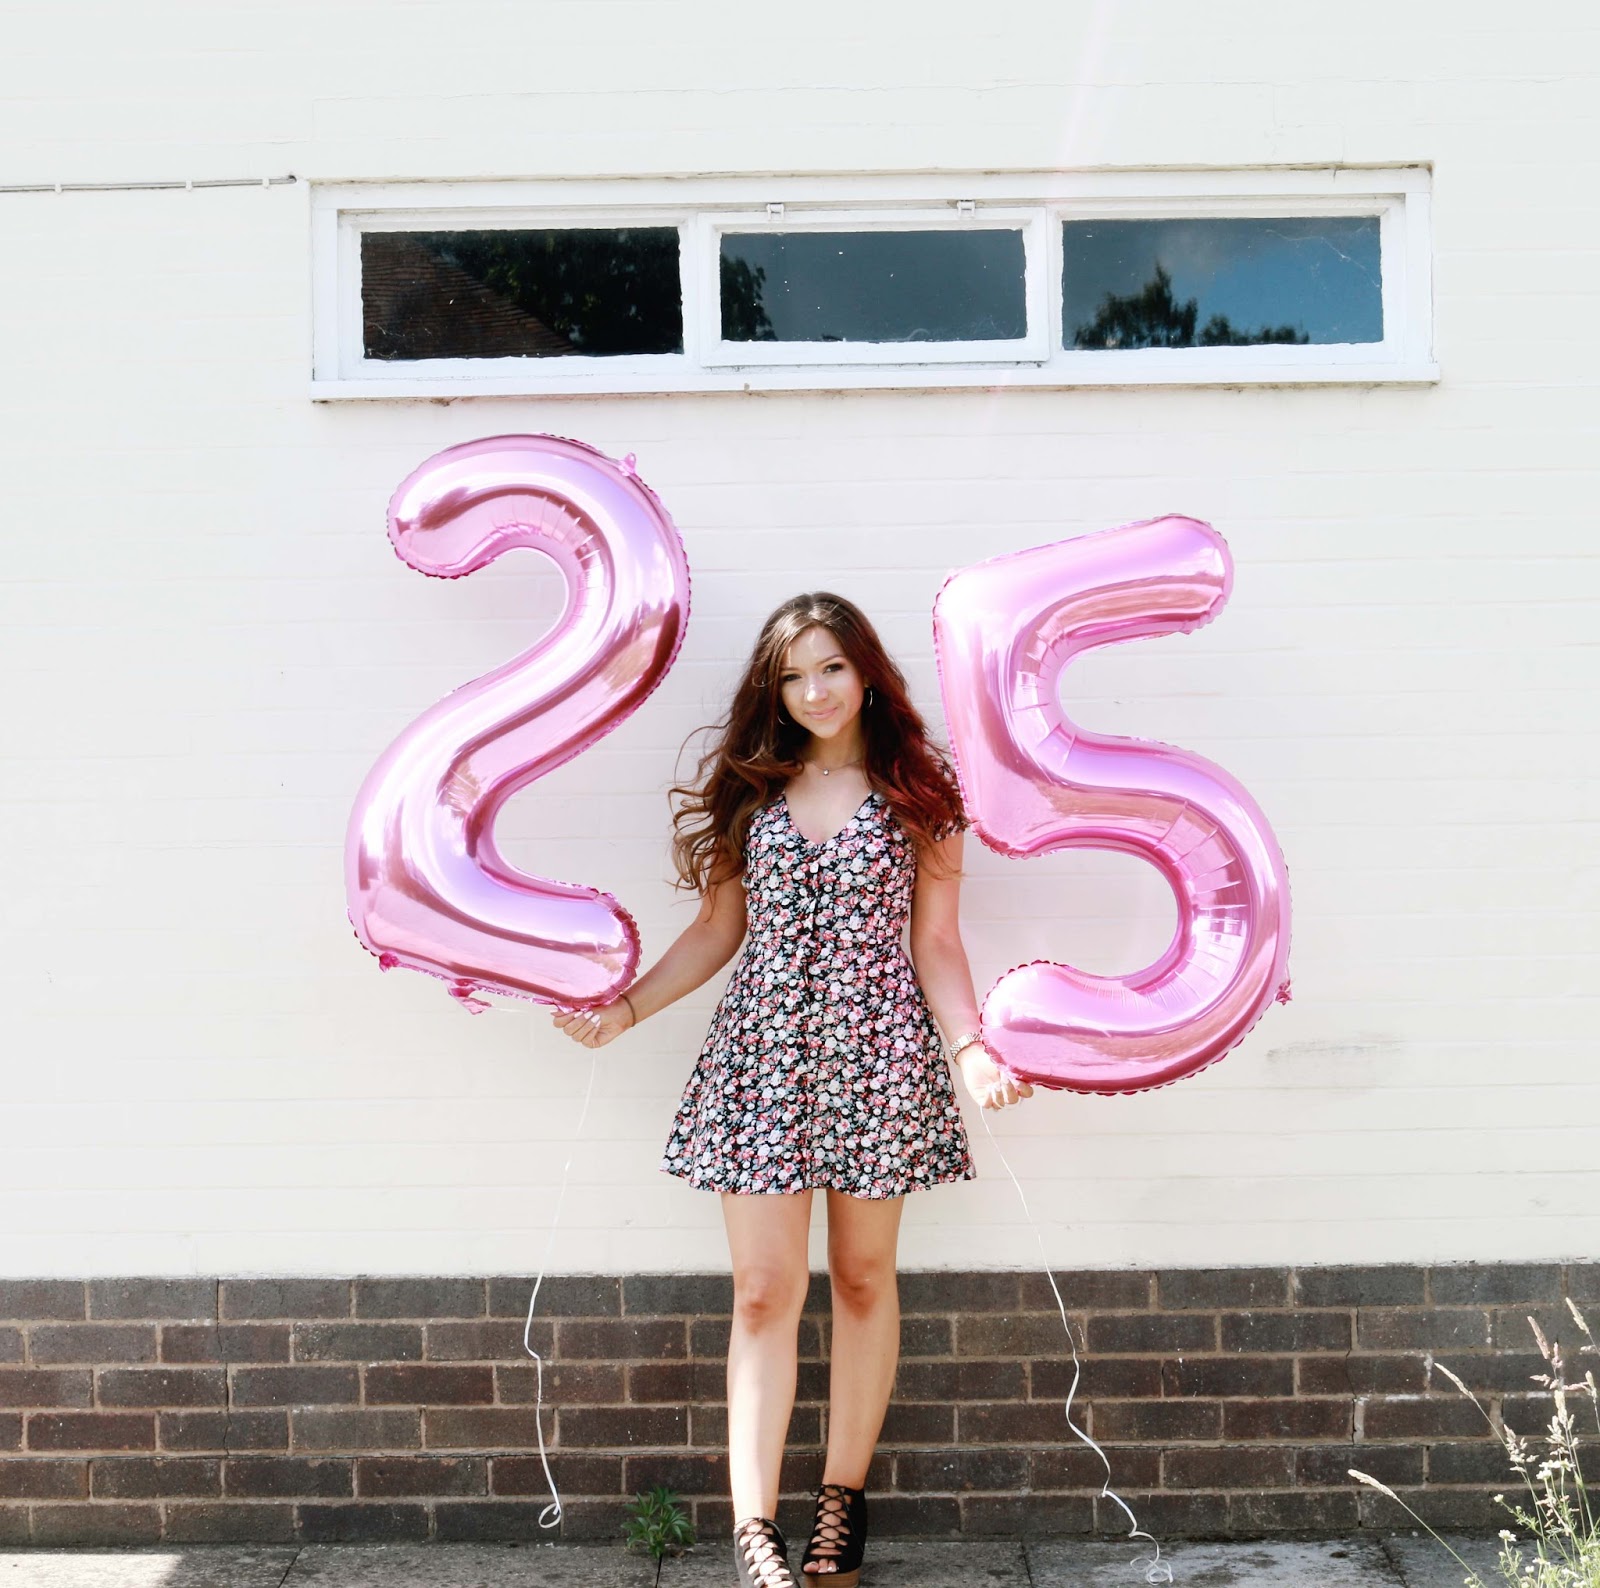 lifestyle, 25 Things I learnt before I was 25, 25 things, life lessons, life advice, quarter life crisis, dizzybrunette3, number balloons, birthday, turning 25, 